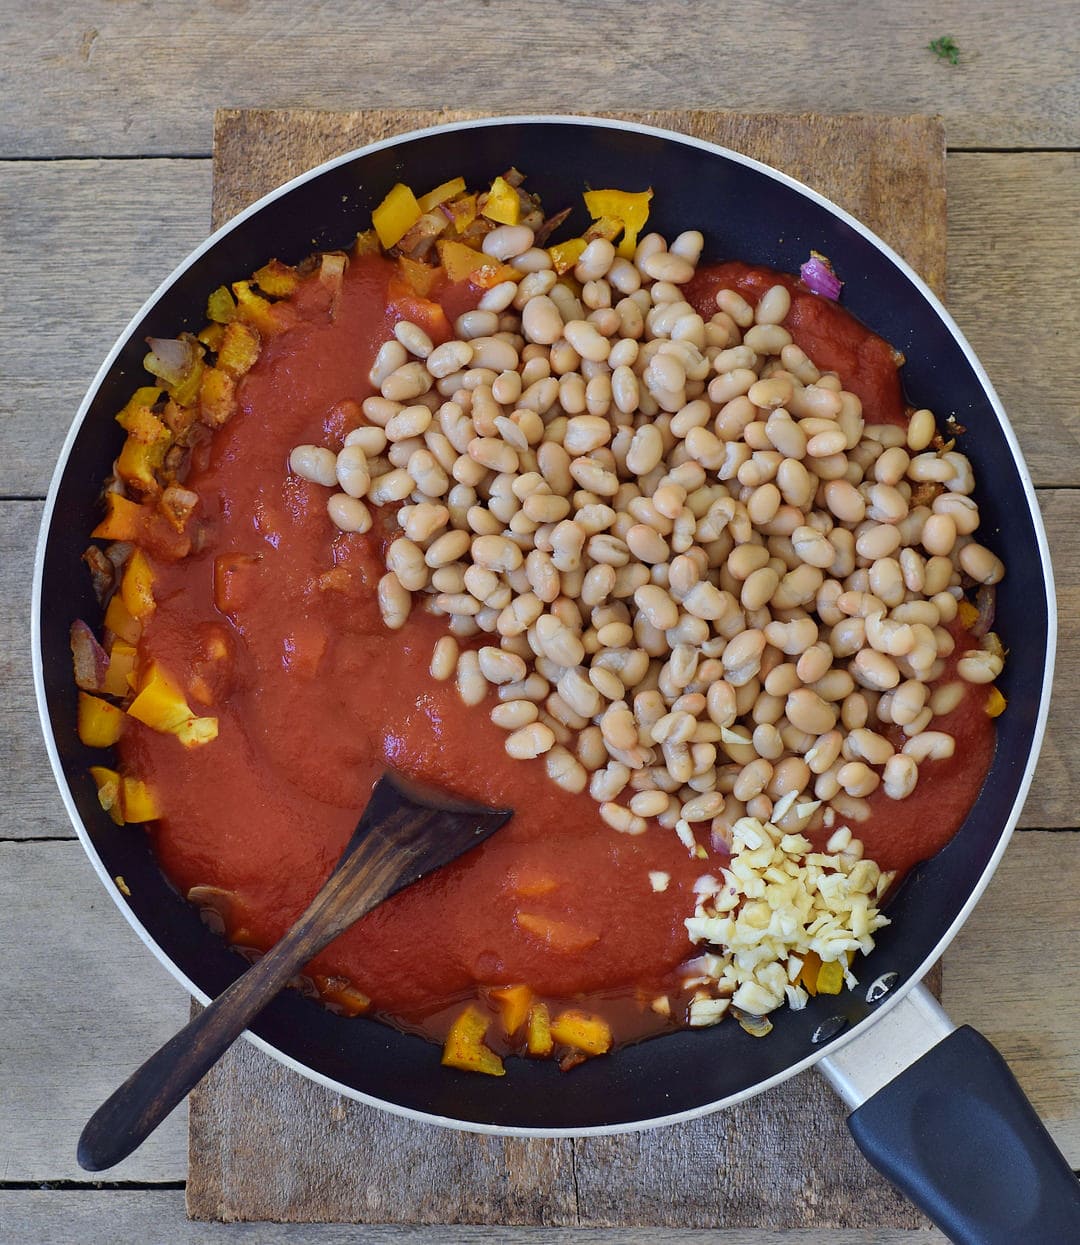 tomato sauce with cannellini beans and veggies in a pan